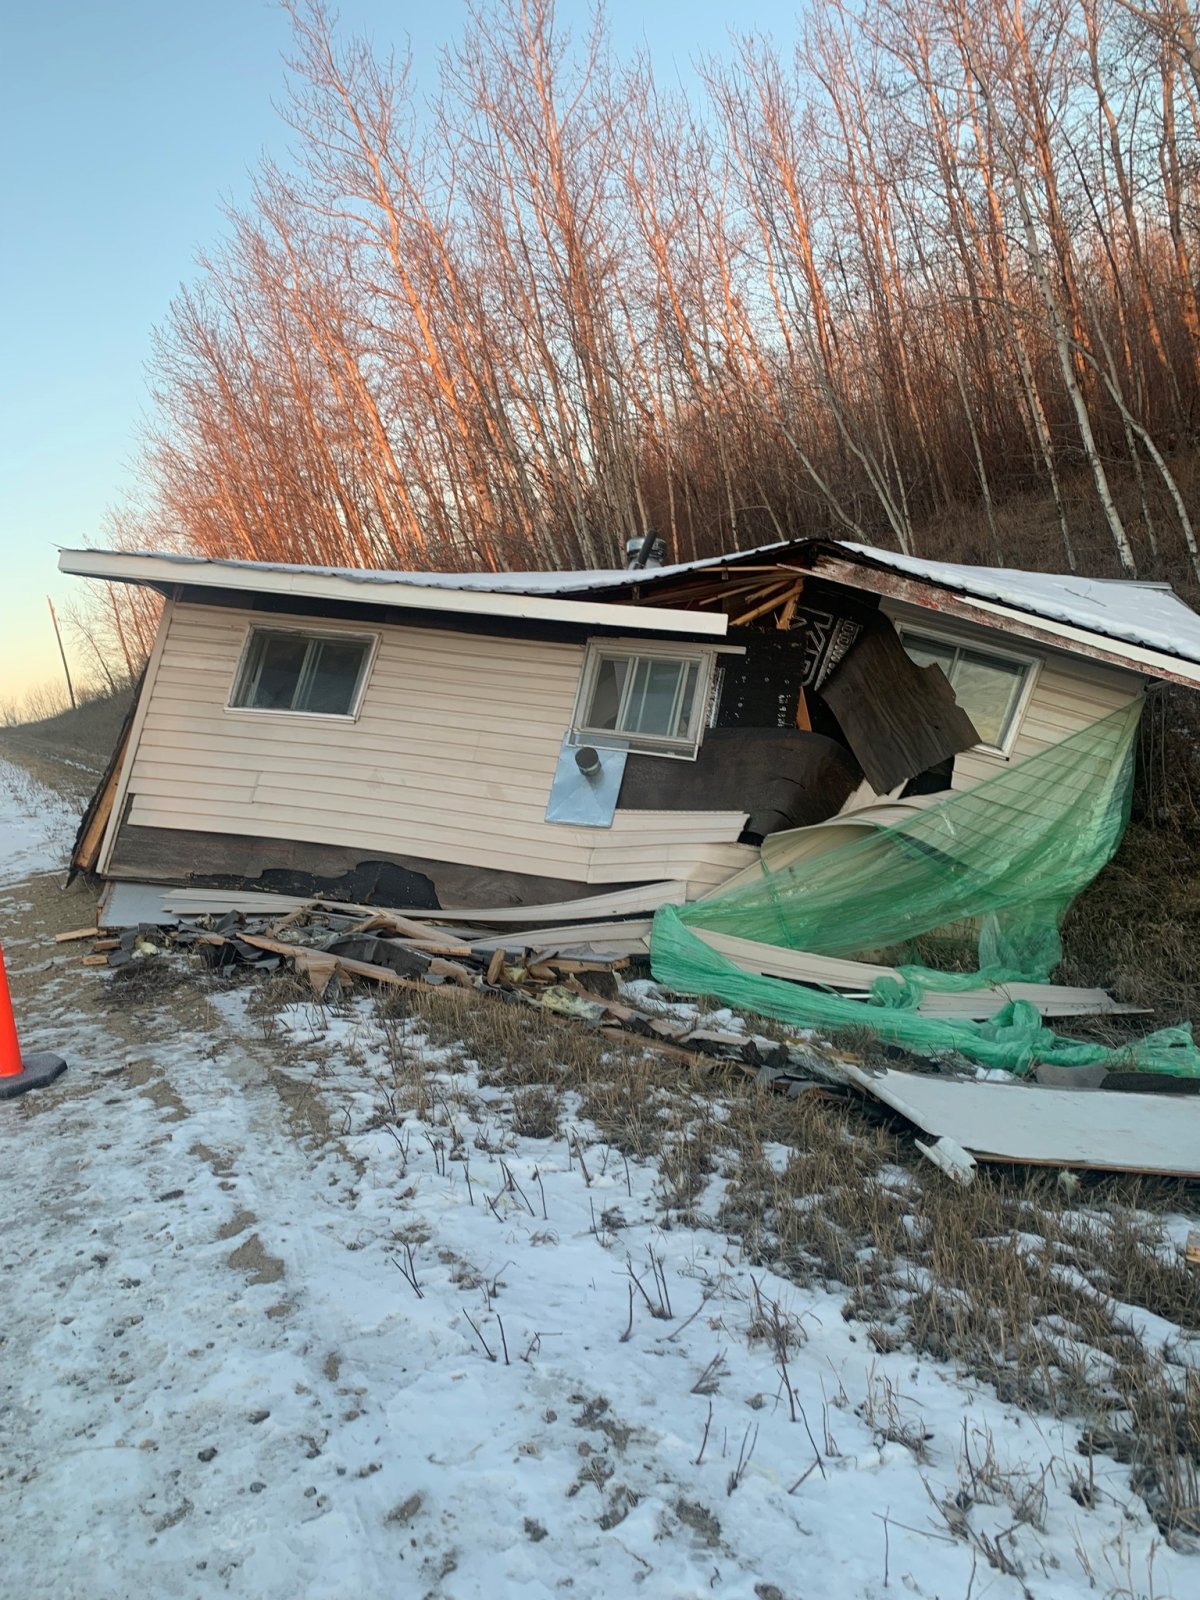 A house found abandoned in a ditch just west of Big Shell Lake earlier this November.